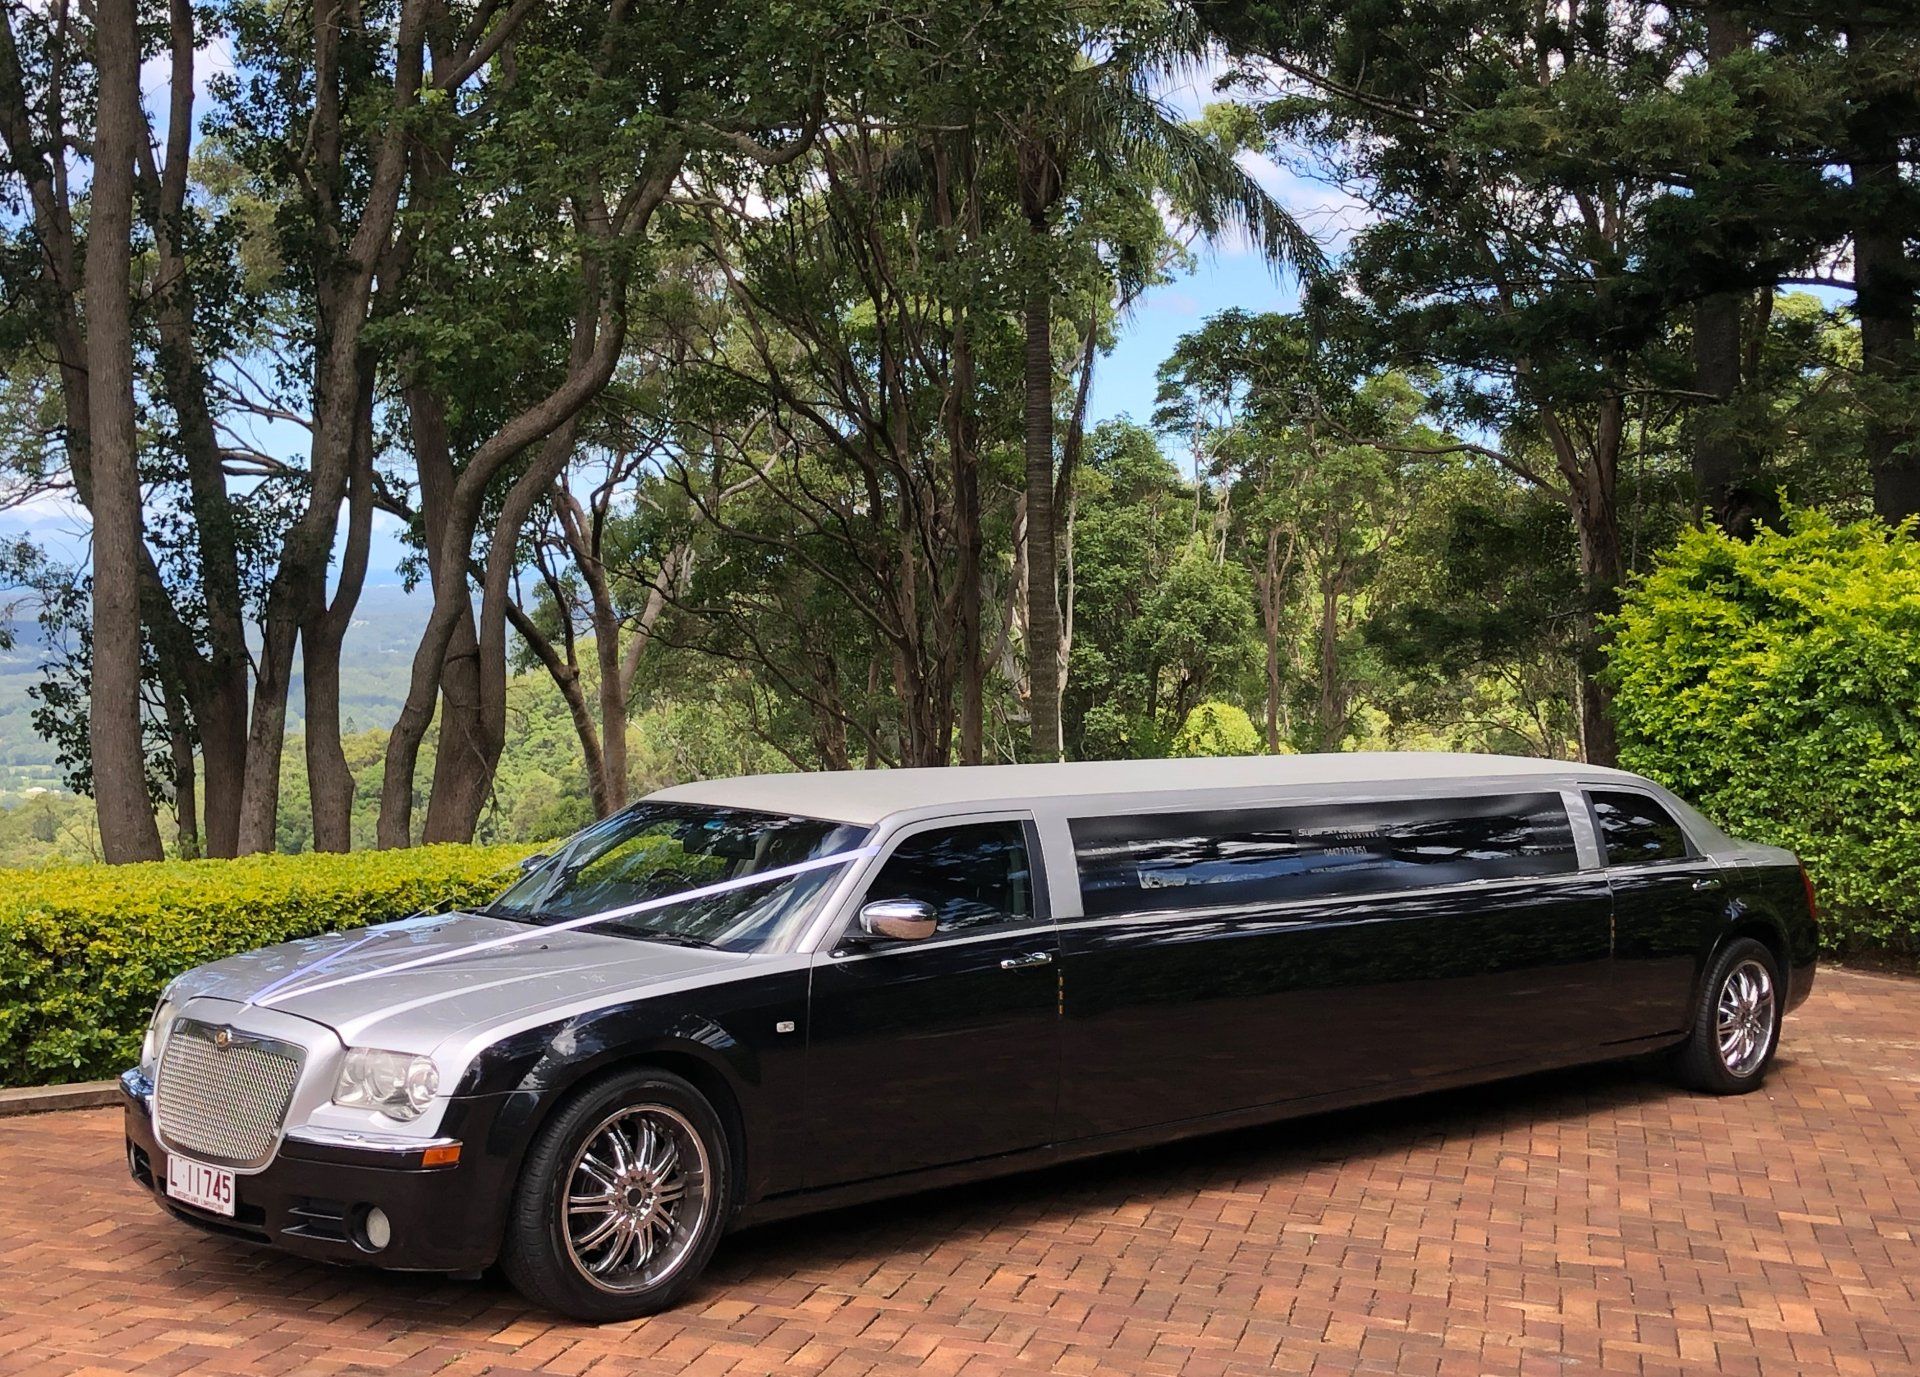 Luxury Black Limousine — Superstretch300 Limousines in Golden Beach, QLD